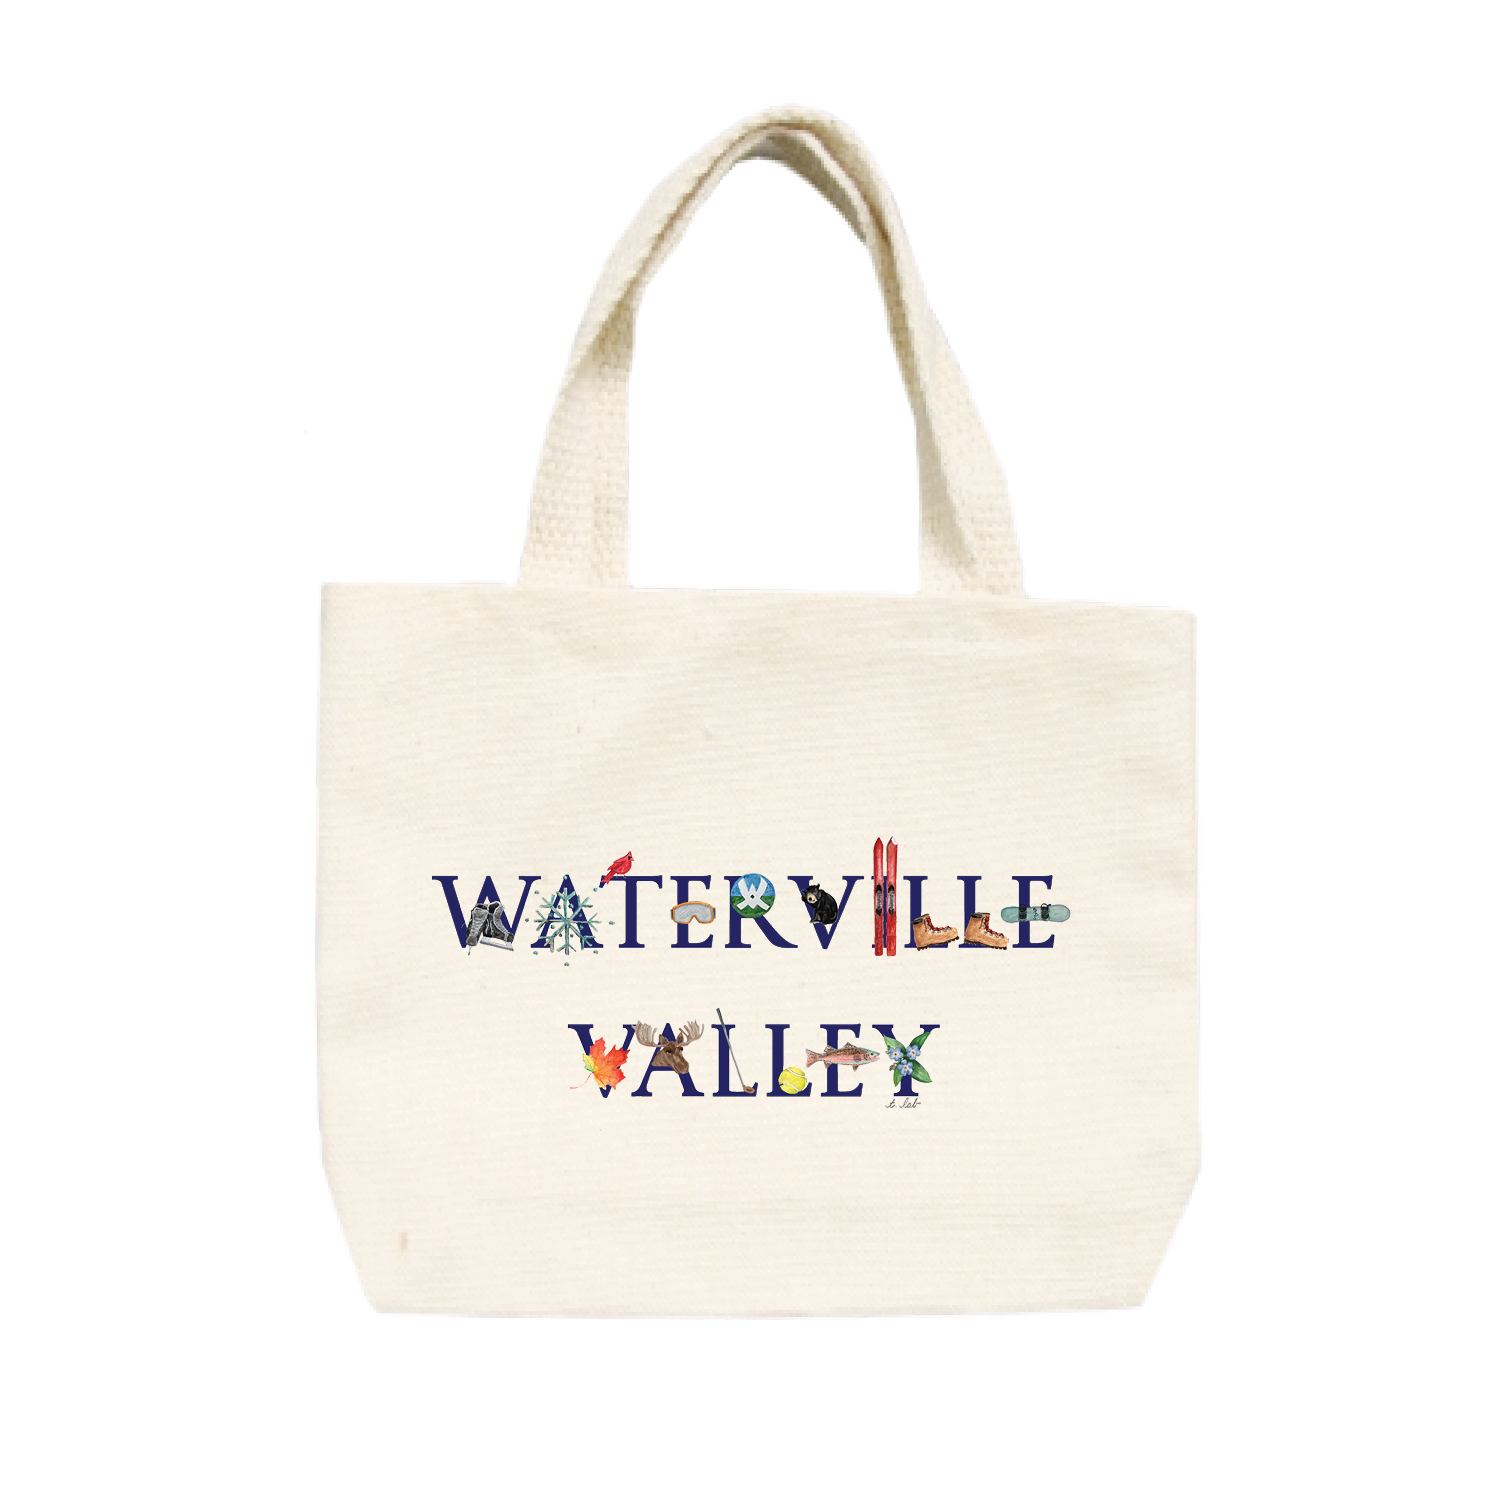 waterville valley small tote